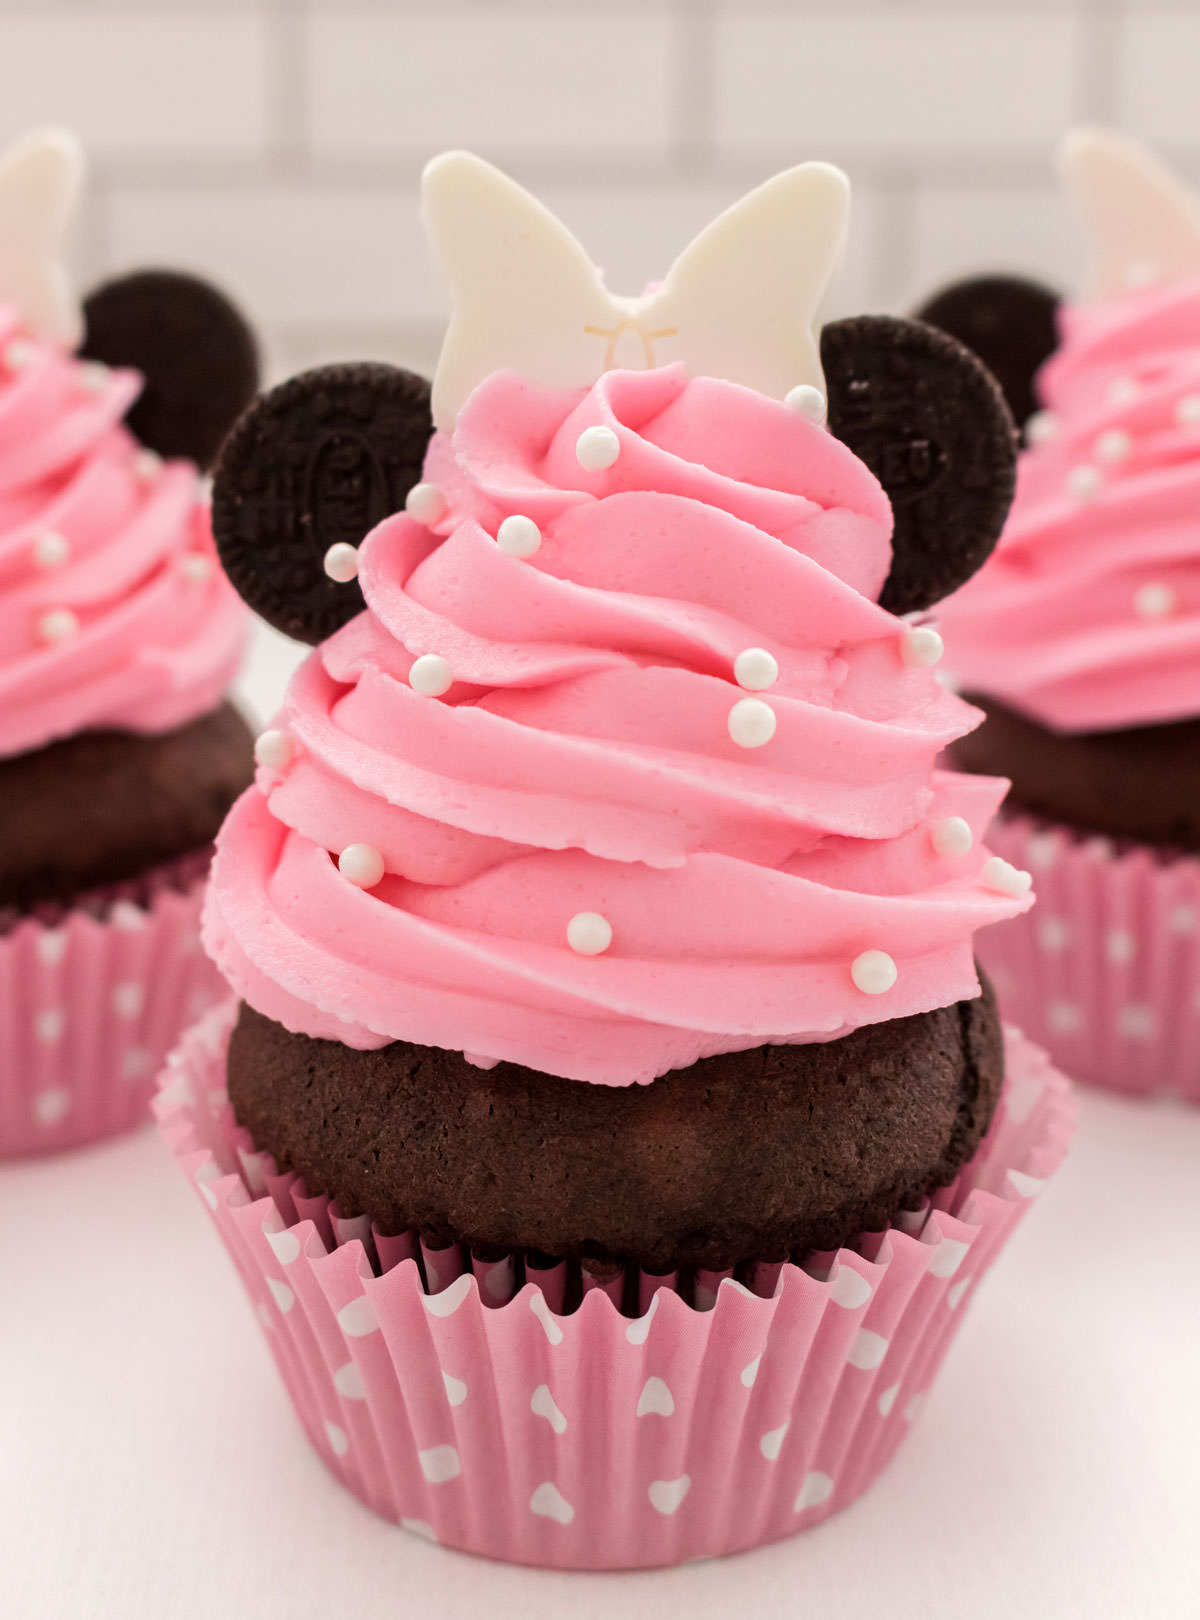 Closeup of a pink Minnie Mouse Cupcake with pink buttercream frosting and Oreo cookie ears sitting on a white table in front of other cupcakes.